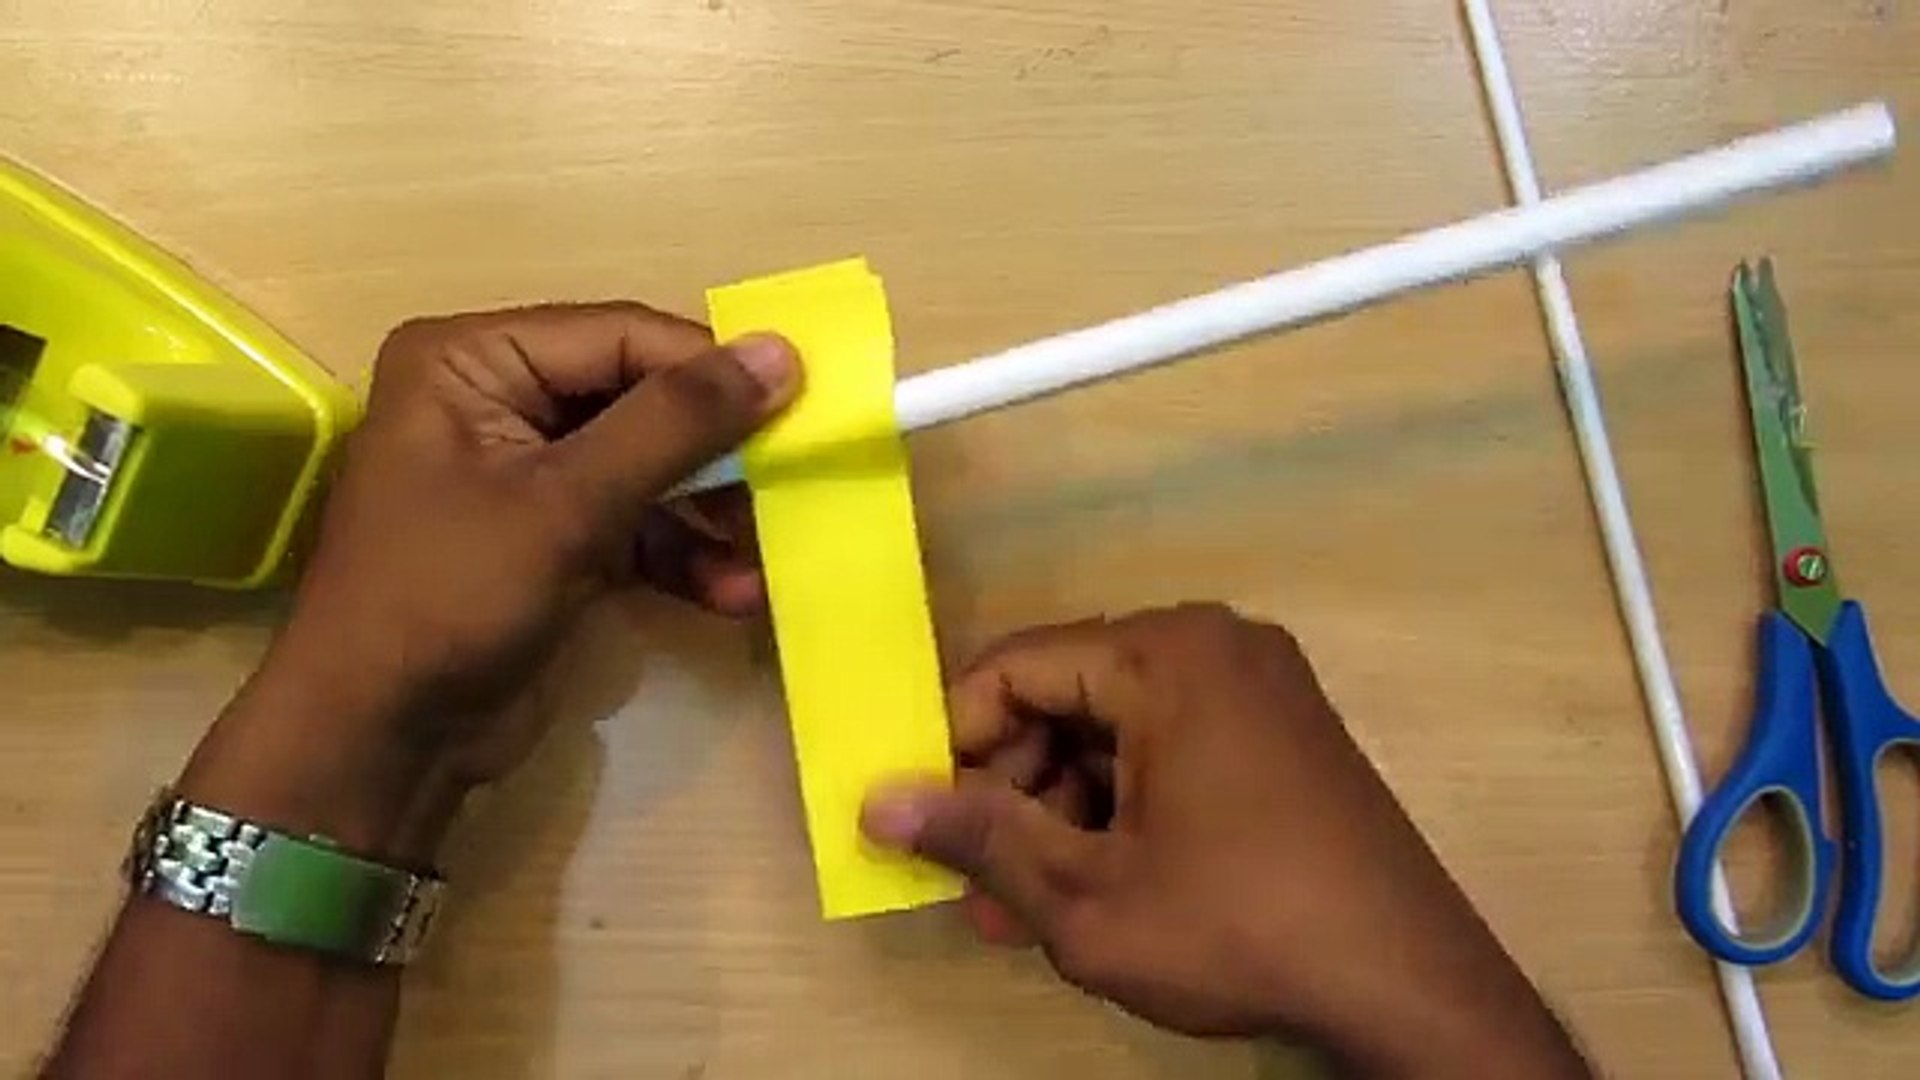 How To Make A Simple Paper Gun That Shoots Paper Bullet Easy Tutorials